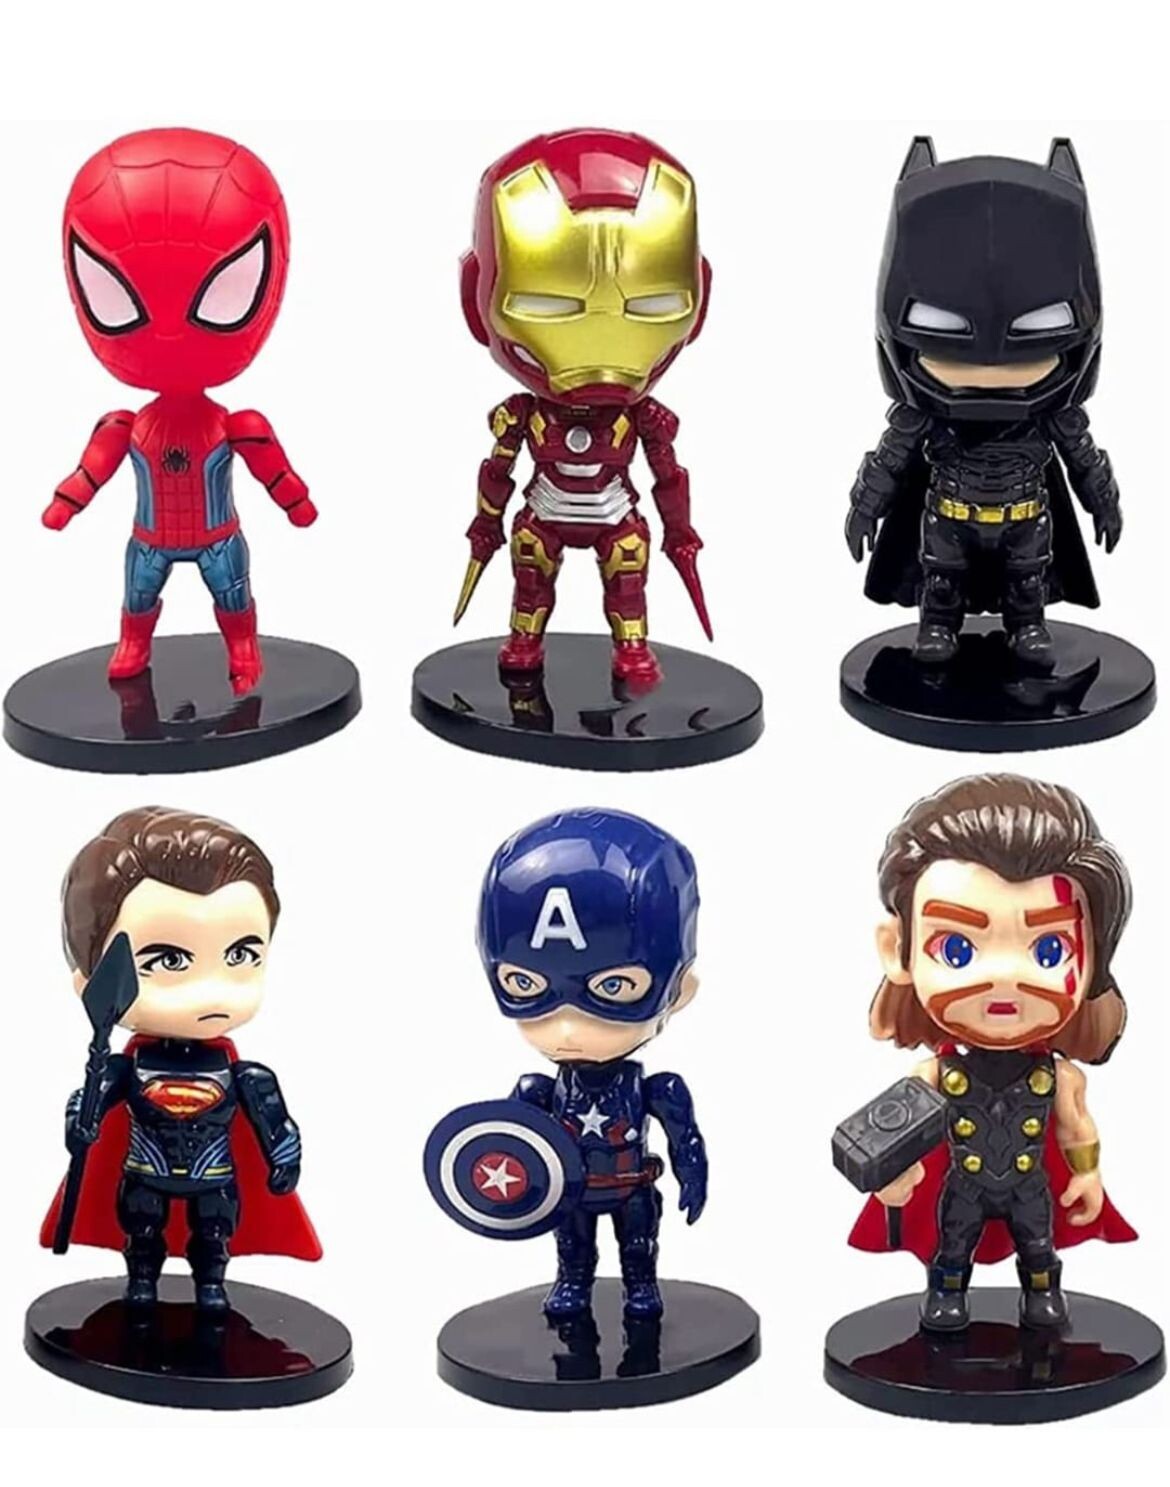 6 PCS Cute Superhero Avengers Cake Toppers, Miniature Figurine, Cake Decoration, Cake Theme, Mini Figures Set, Birthday Party Supplies, Cake Toppers Action Figures, Gift Children's Play Toys Set